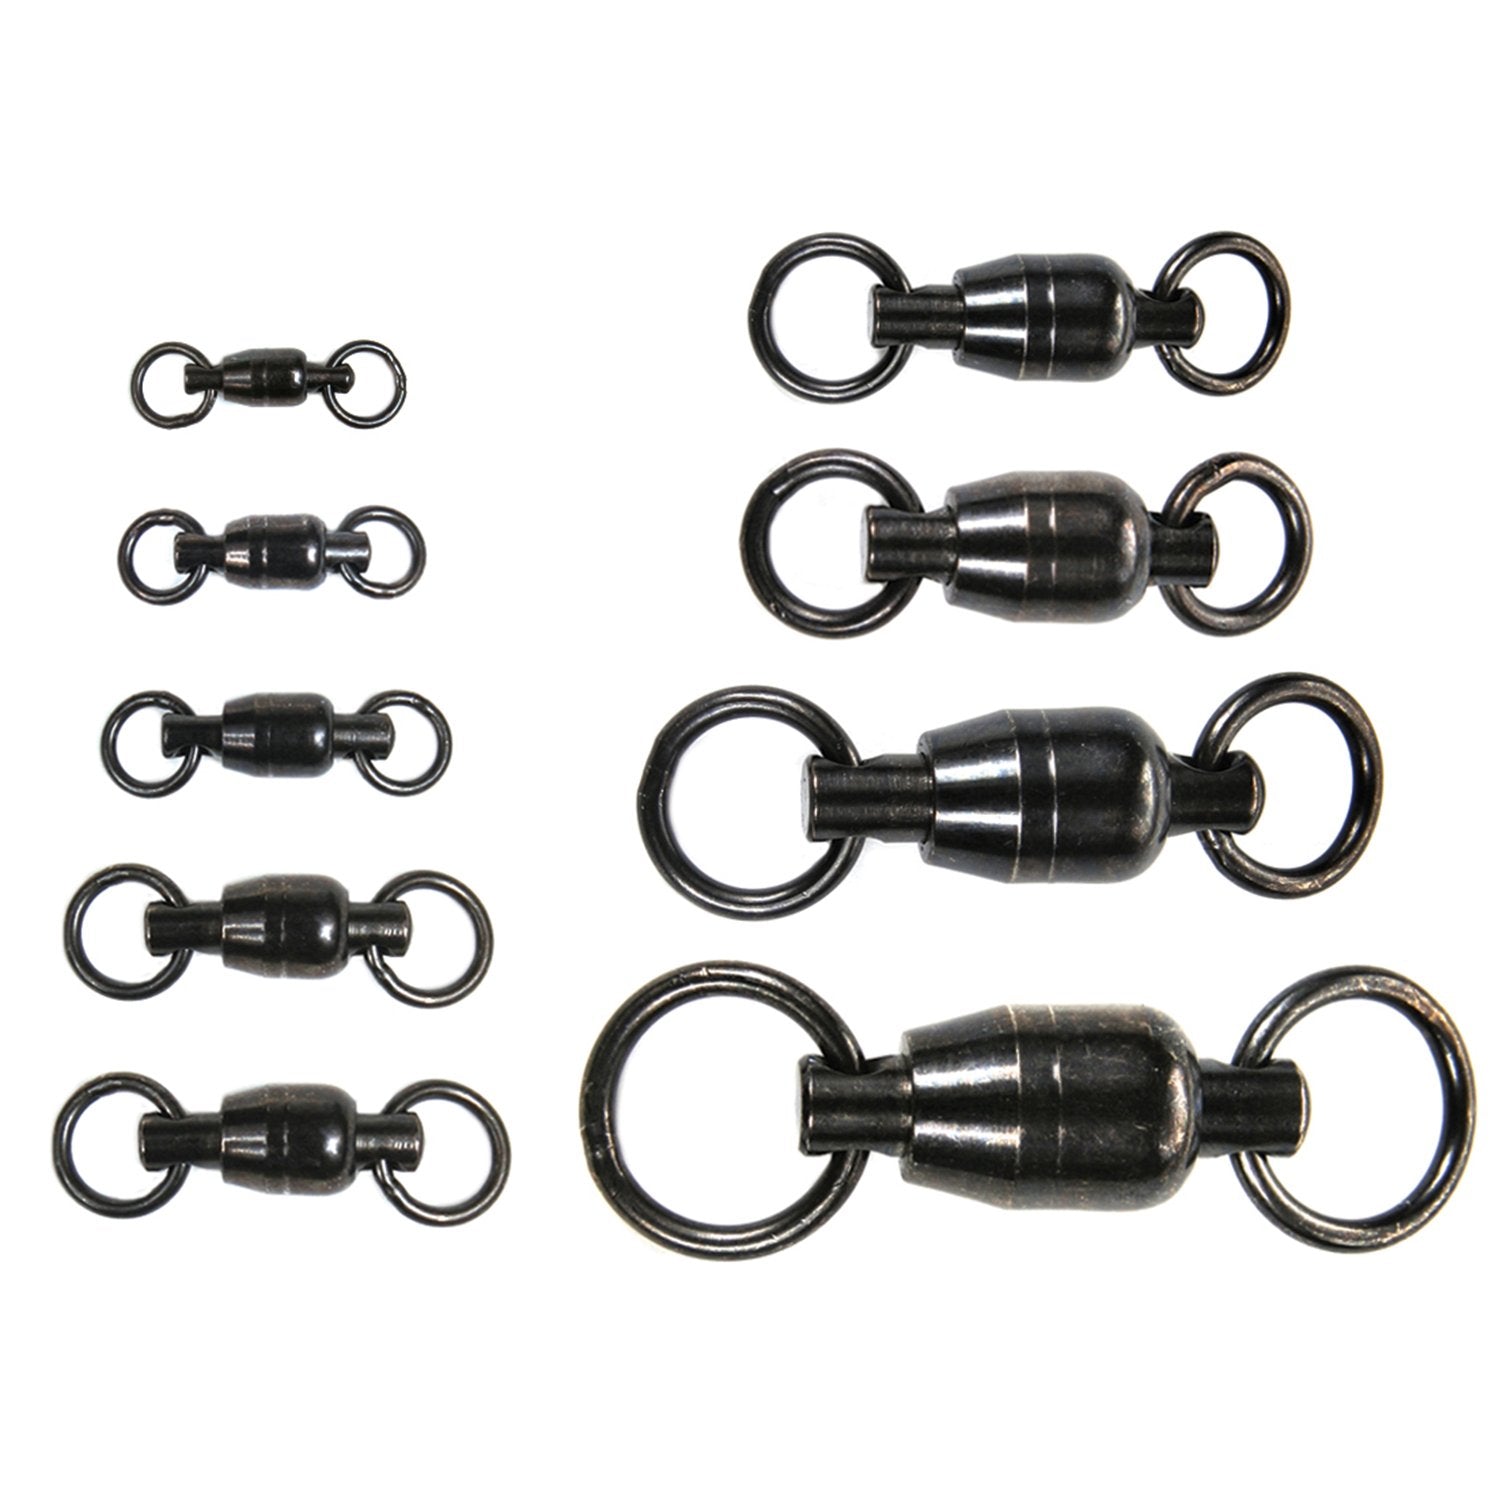 Stainless Steel Bearing Swivel Bait  Stainless Steel Fishing Accessories -  10pc - Aliexpress